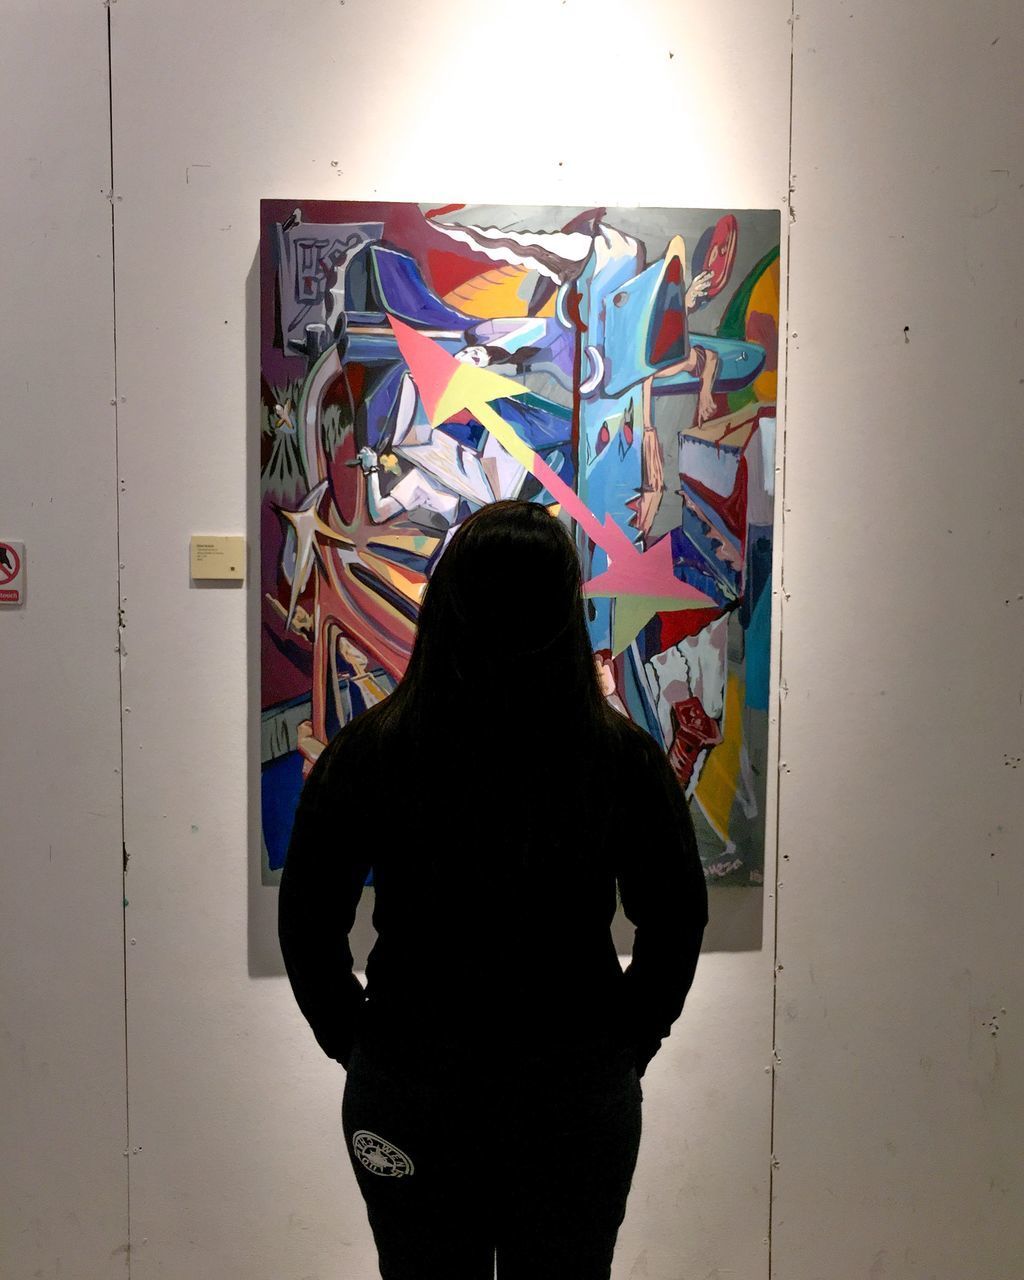 REAR VIEW OF WOMAN STANDING AGAINST COLORFUL WALL